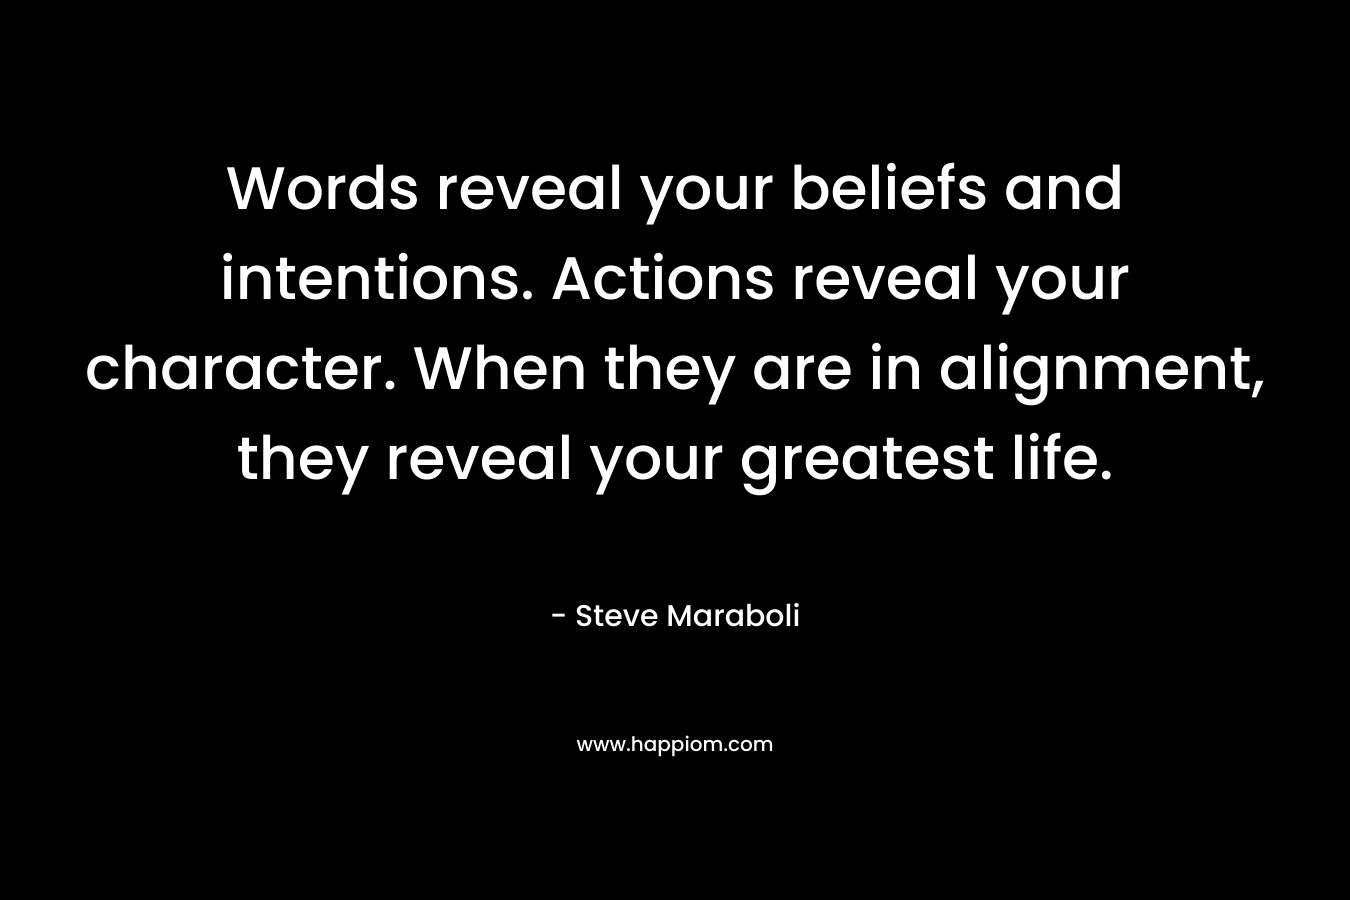 Words reveal your beliefs and intentions. Actions reveal your character. When they are in alignment, they reveal your greatest life.